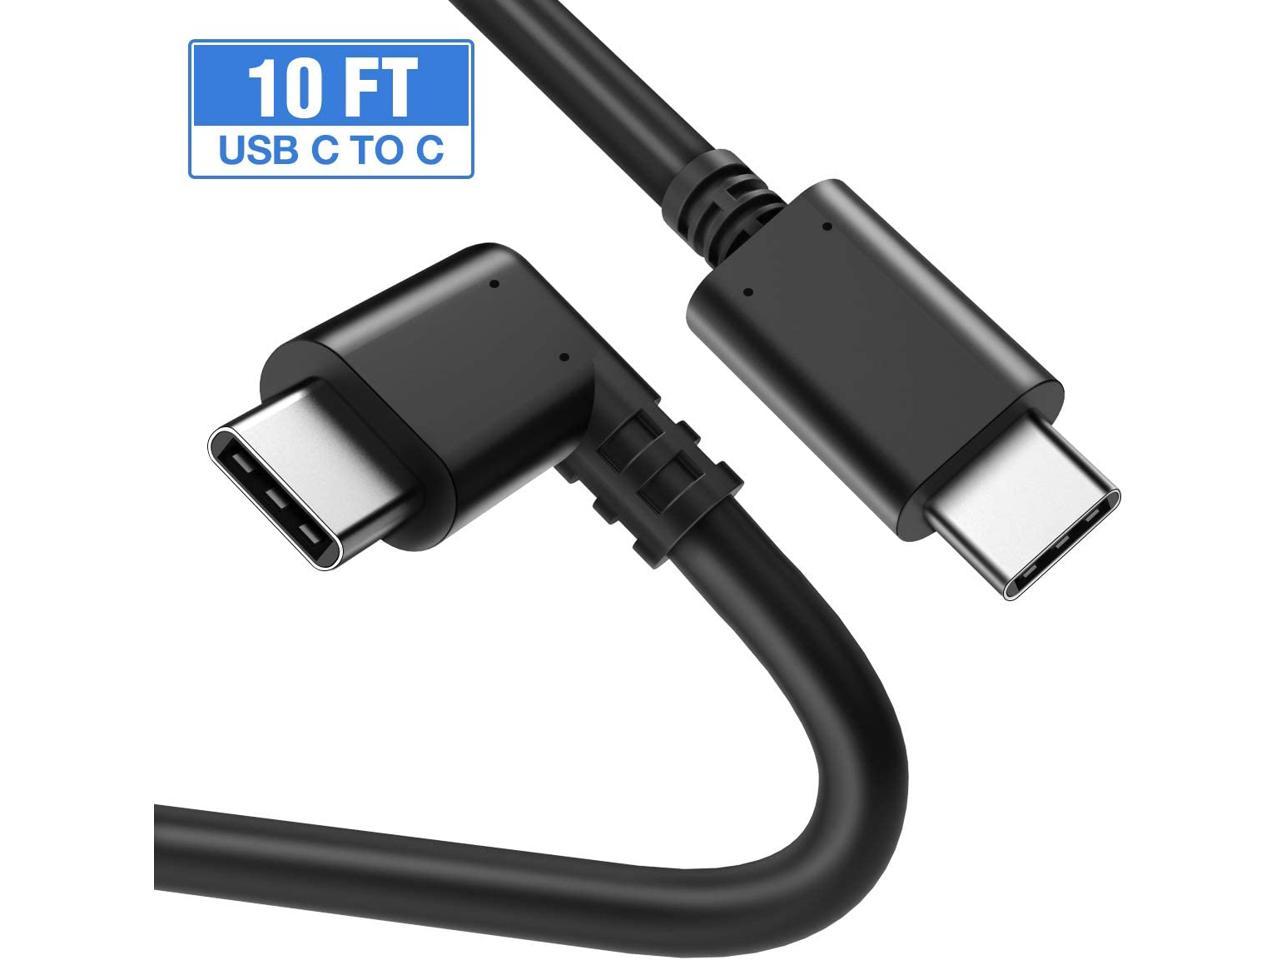 Daugee 16ft USB 3.2 Gen 1 Oculus Link Cable with Extra USB C to USB Adapter High Speed PC Data Transfer & Fast Charging Nylon Braided Compatible for VR Headset Gaming PC Oculus Quest 2 Link Cable 